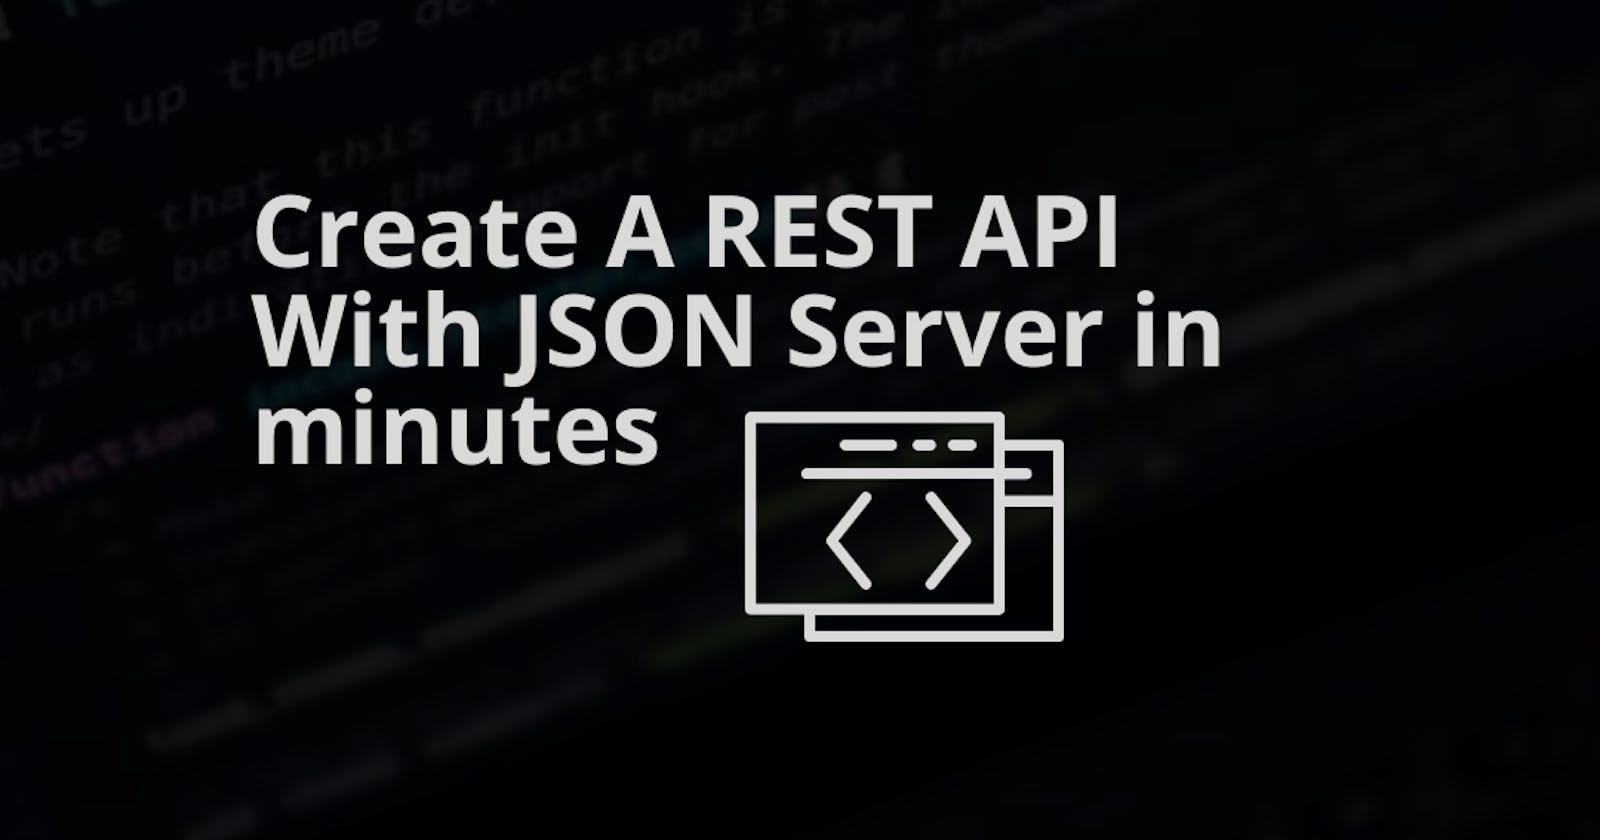 Create A REST API With JSON Server
in minutes